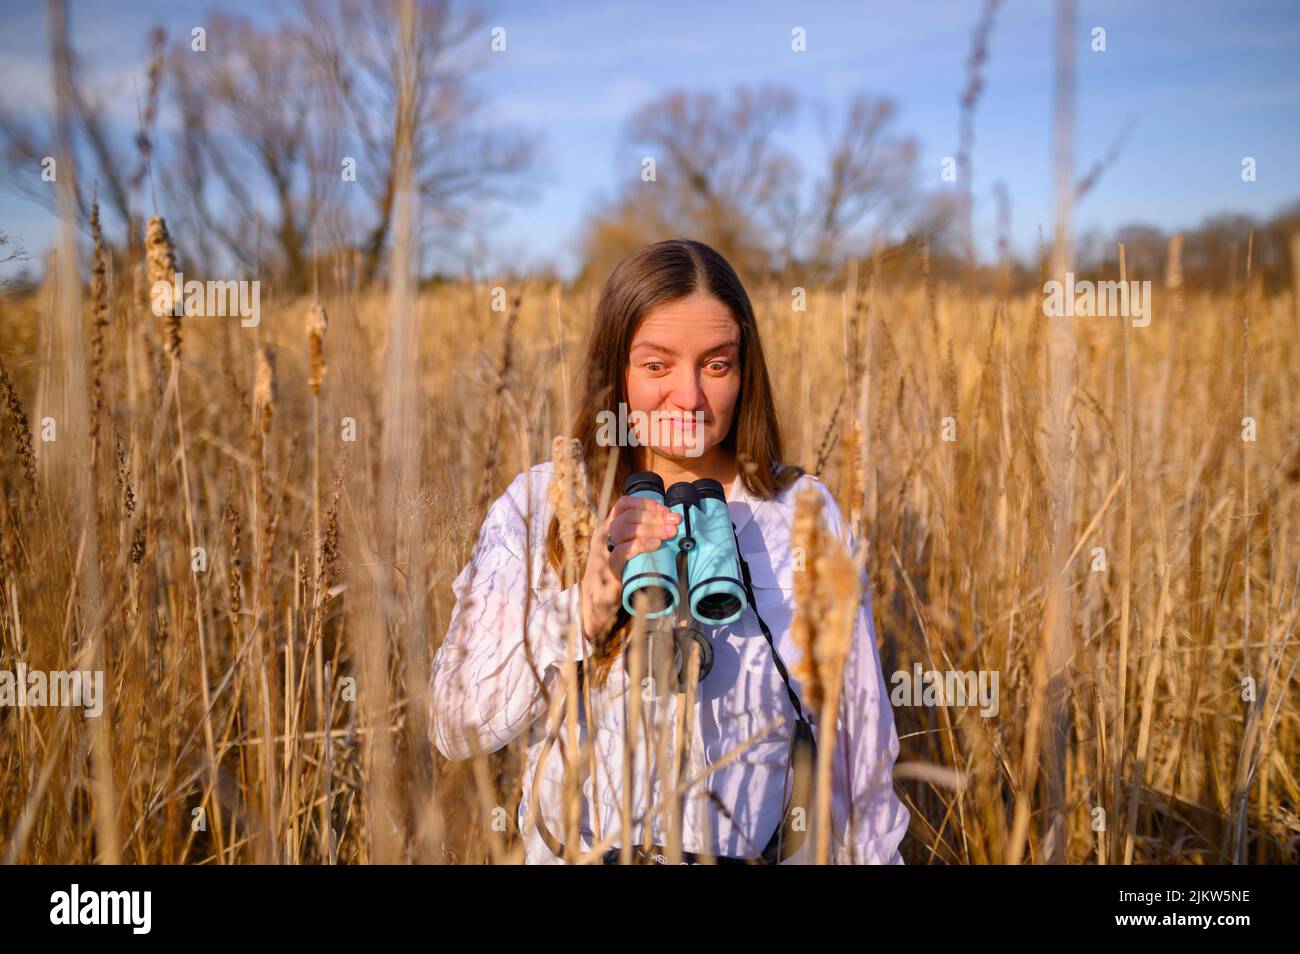 Woman looking at the to the side, with a confused expression, with blue binoculars standing in a field of cat tails in a marsh during the day. Stock Photo